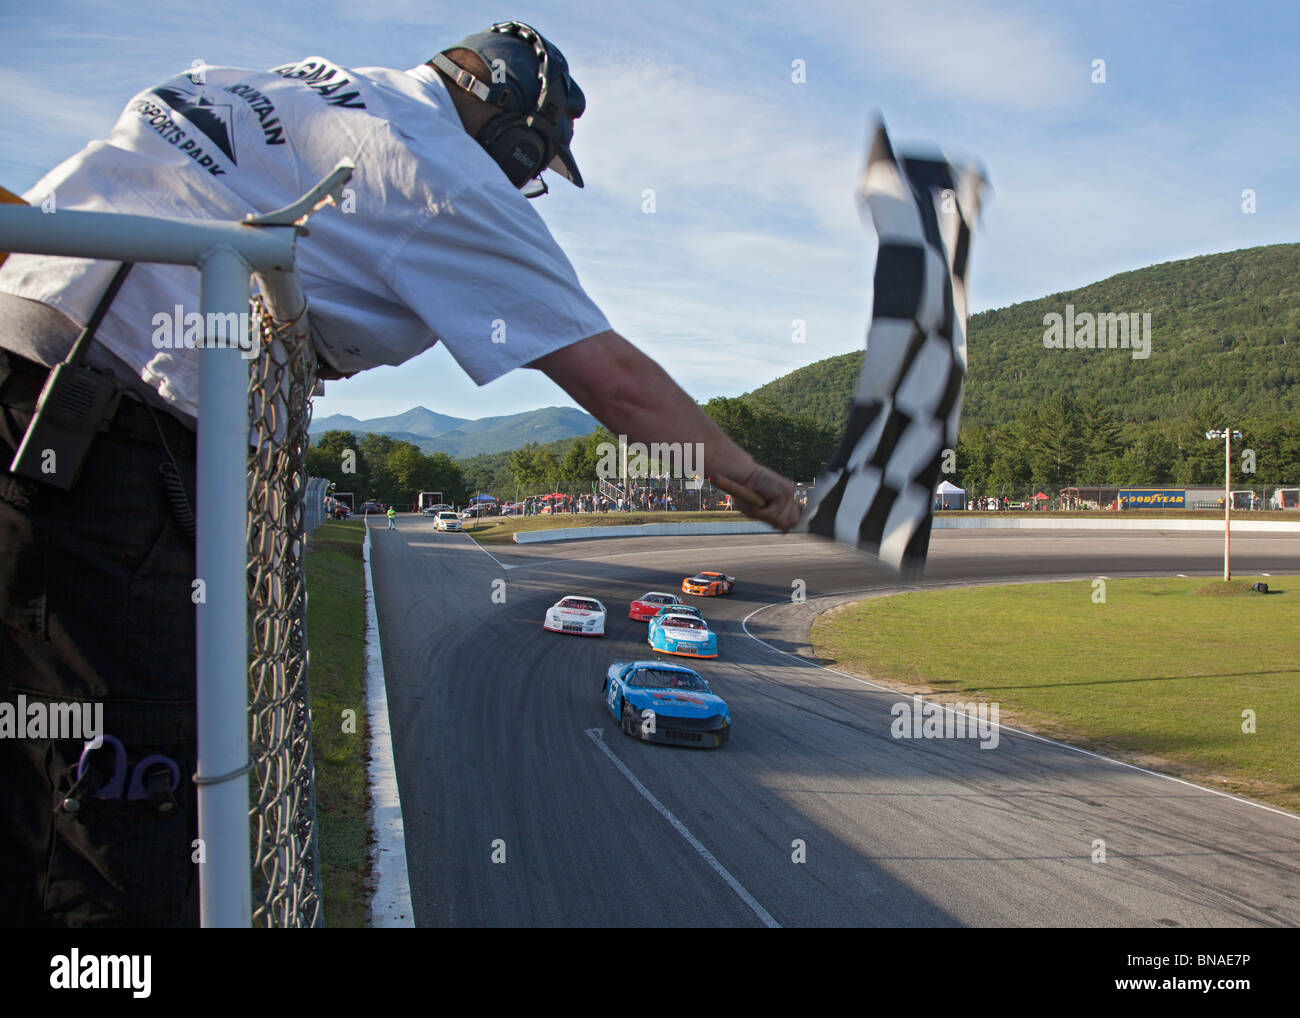 Woodstock, New Hampshire - The flagman waves the checkered flag during stock car racing at White Mountain Motorsports Park. Stock Photo